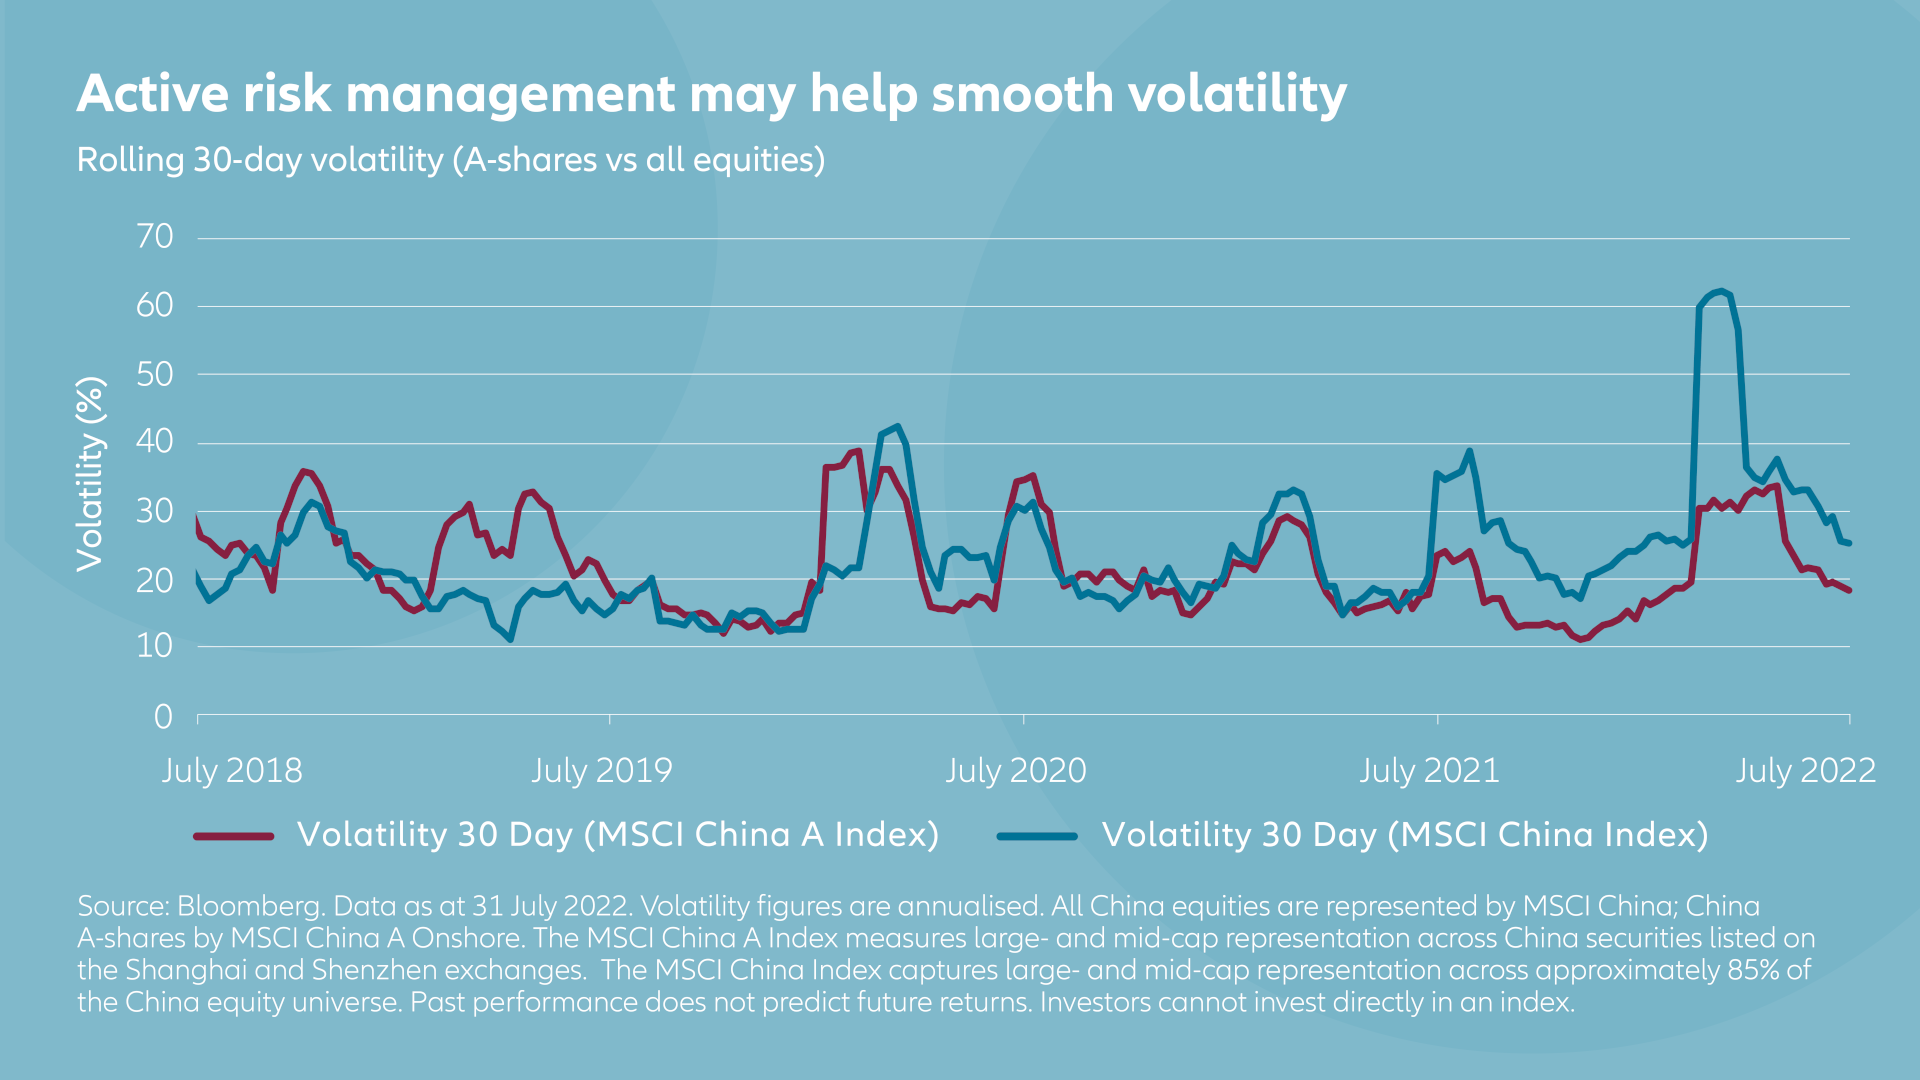 Active risk management may help smooth volatility